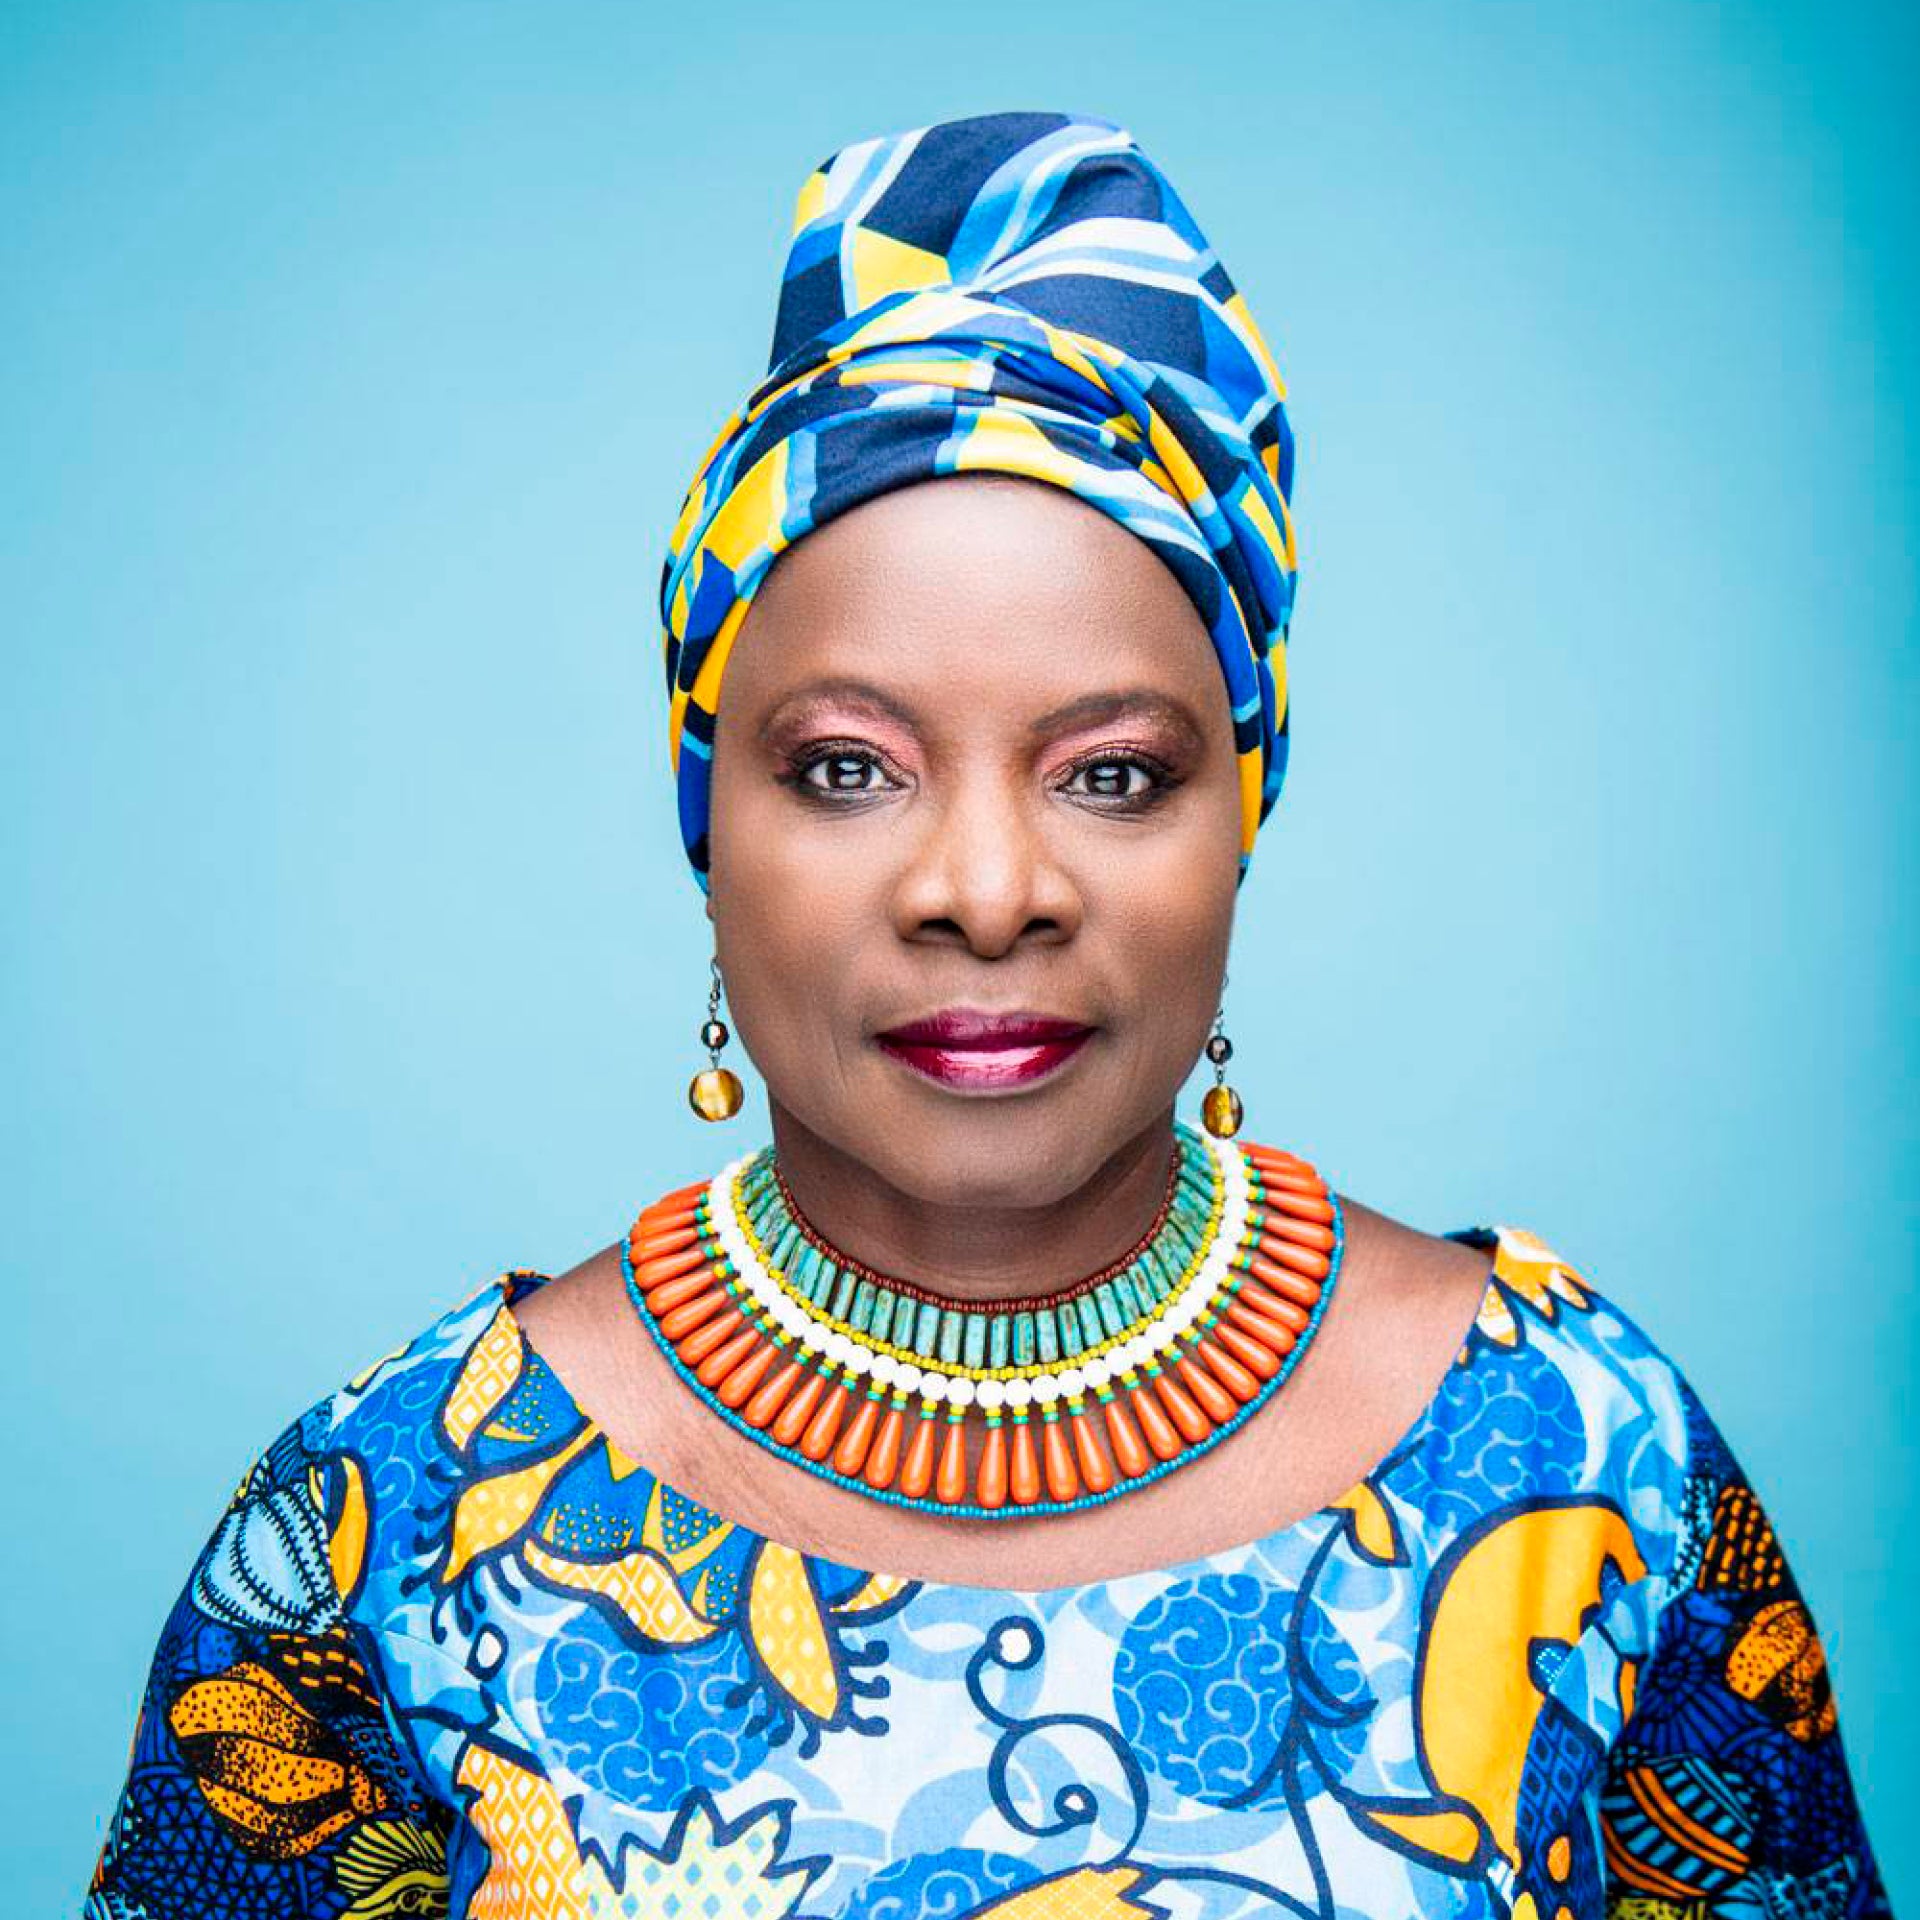 Angélique Kpasseloko Hinto Hounsinou Kandjo Manta Zogbin Kidjo, known as Angélique Kidjo, is a five-time Grammy Award winning Beninese singer-songwriter, actress, and activist who is noted for her diverse musical influences and creative music videos.